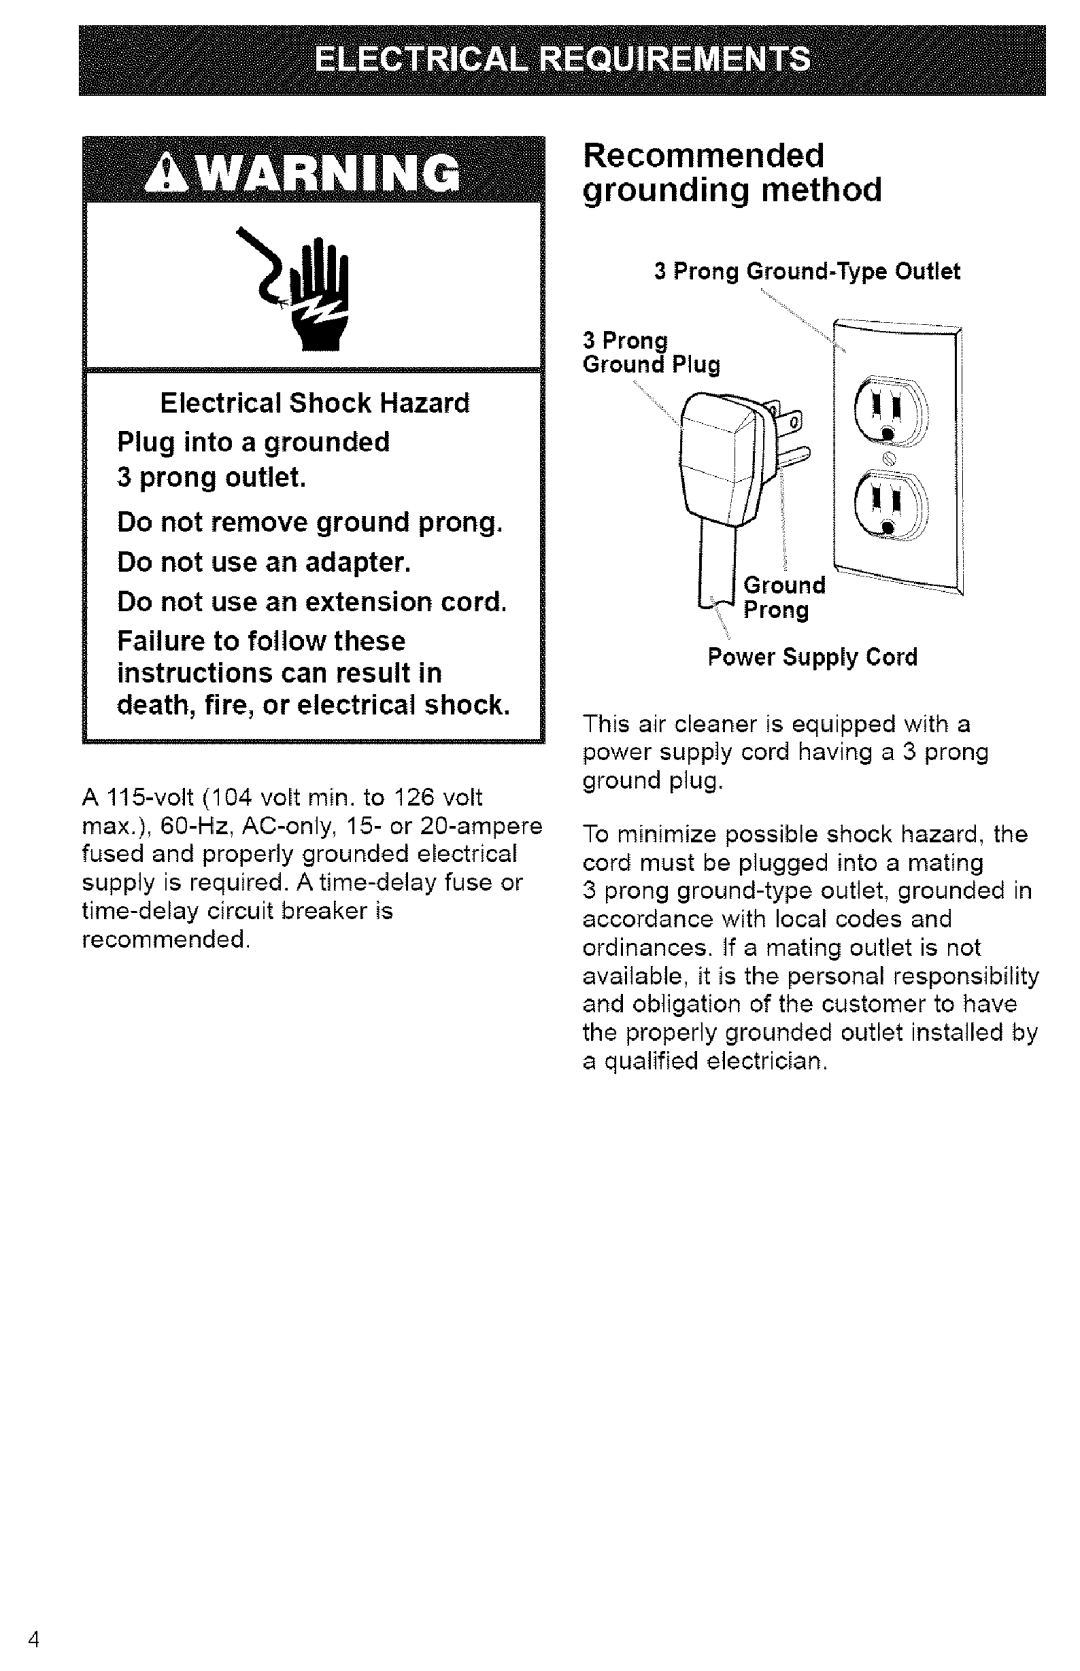 Kenmore 106.832 Recommended grounding method, Electrical Shock Hazard, Plug into a grounded 3 prong outlet, Ground Prong 